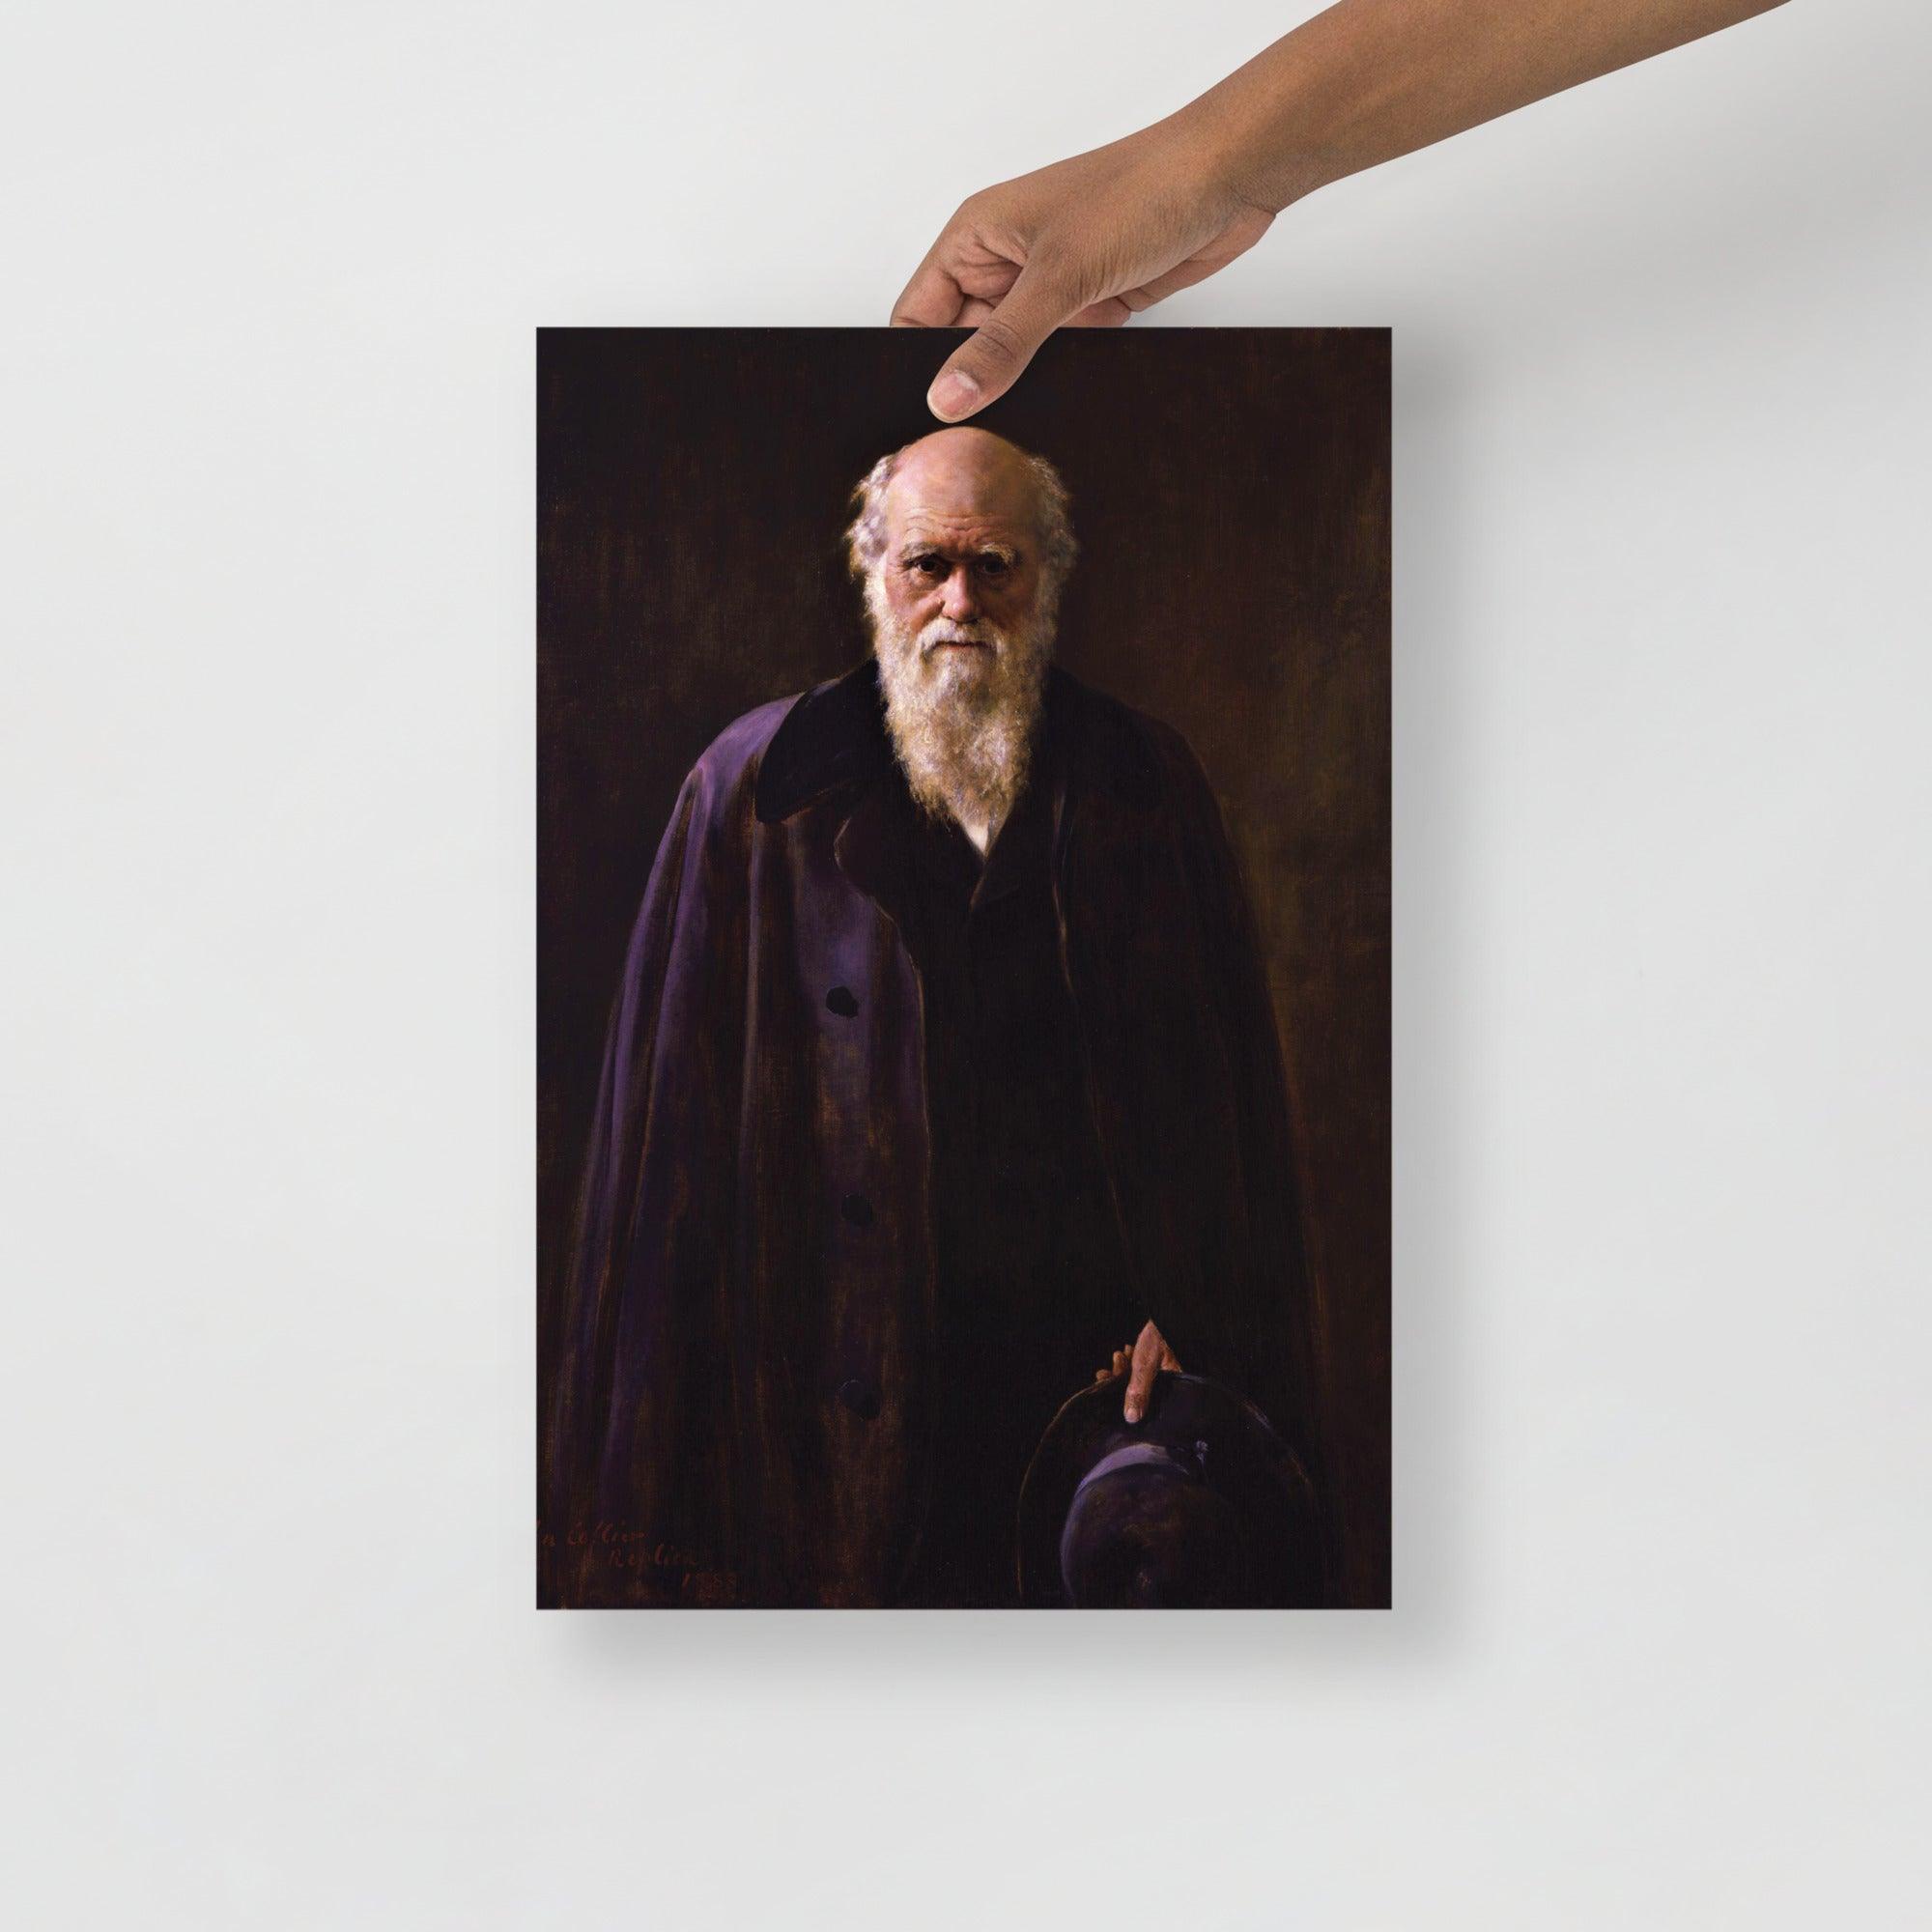 A Charles Darwin By John Collier poster on a plain backdrop in size 12x18”.